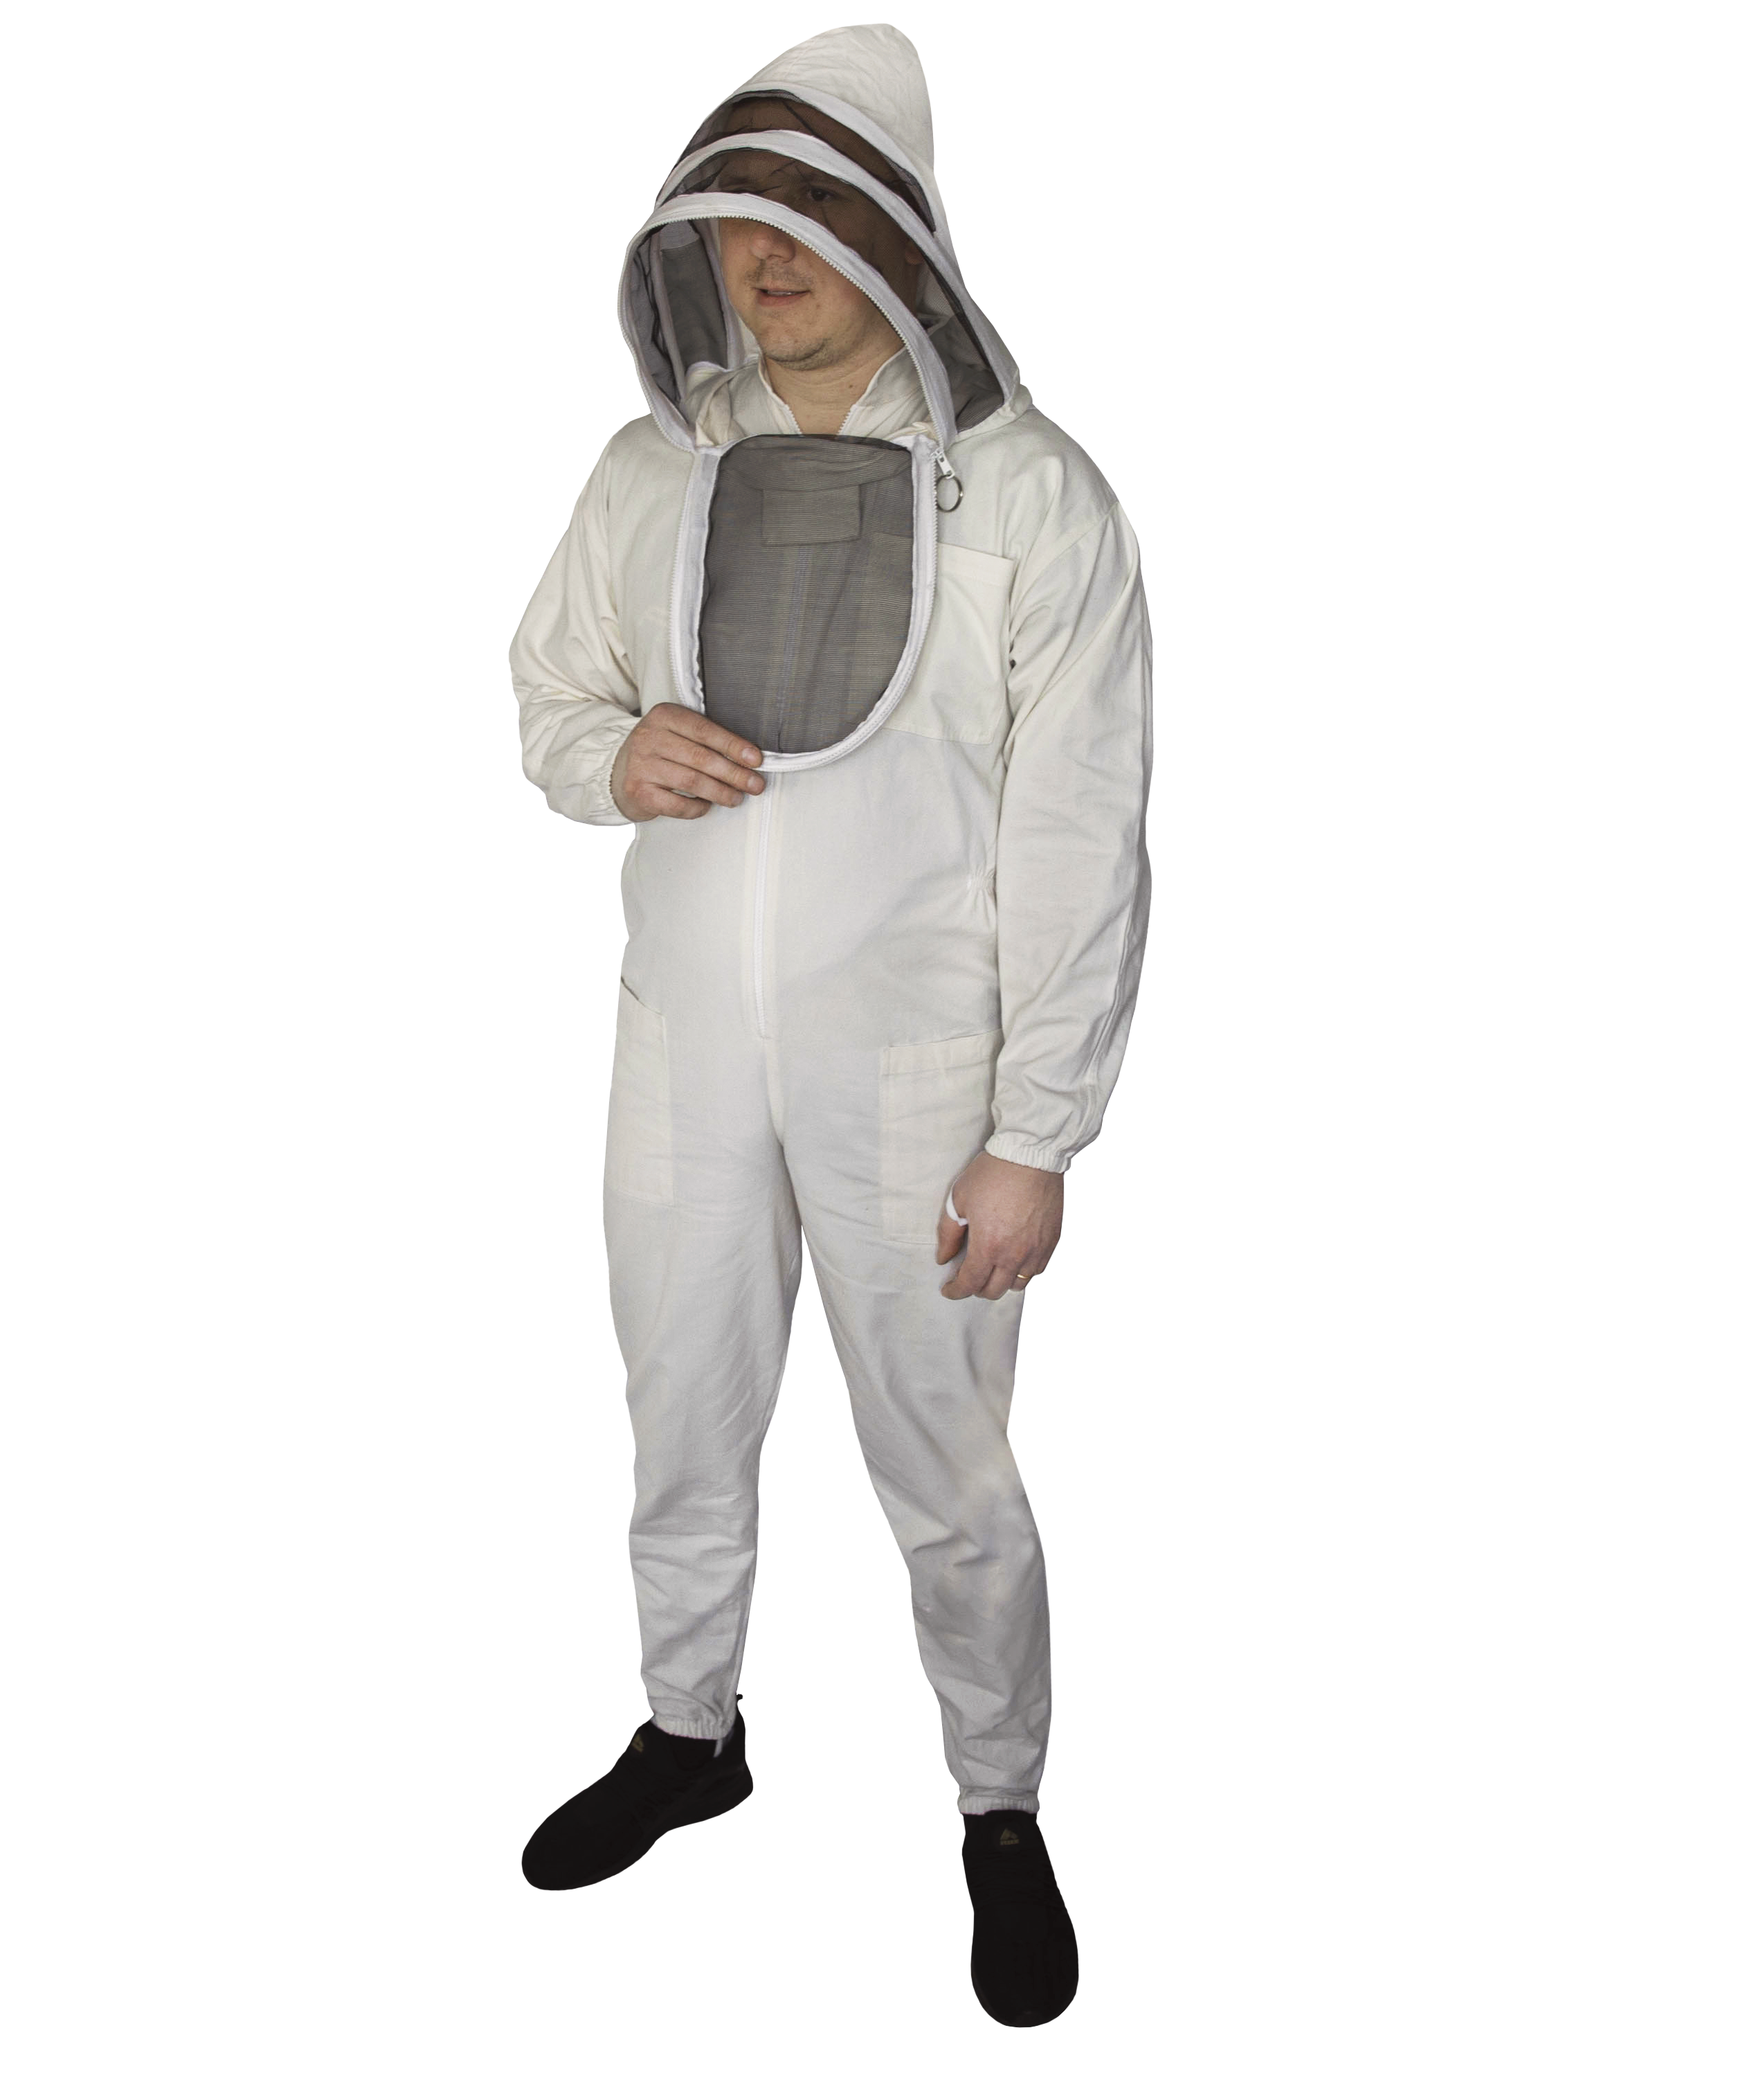 Luwint Kids Full Body Ventilated Beekeeping Suits White/4.26ft Height Cotton Bee Beekeeper Suit with Self Supporting Fencing Veil Hood for Children